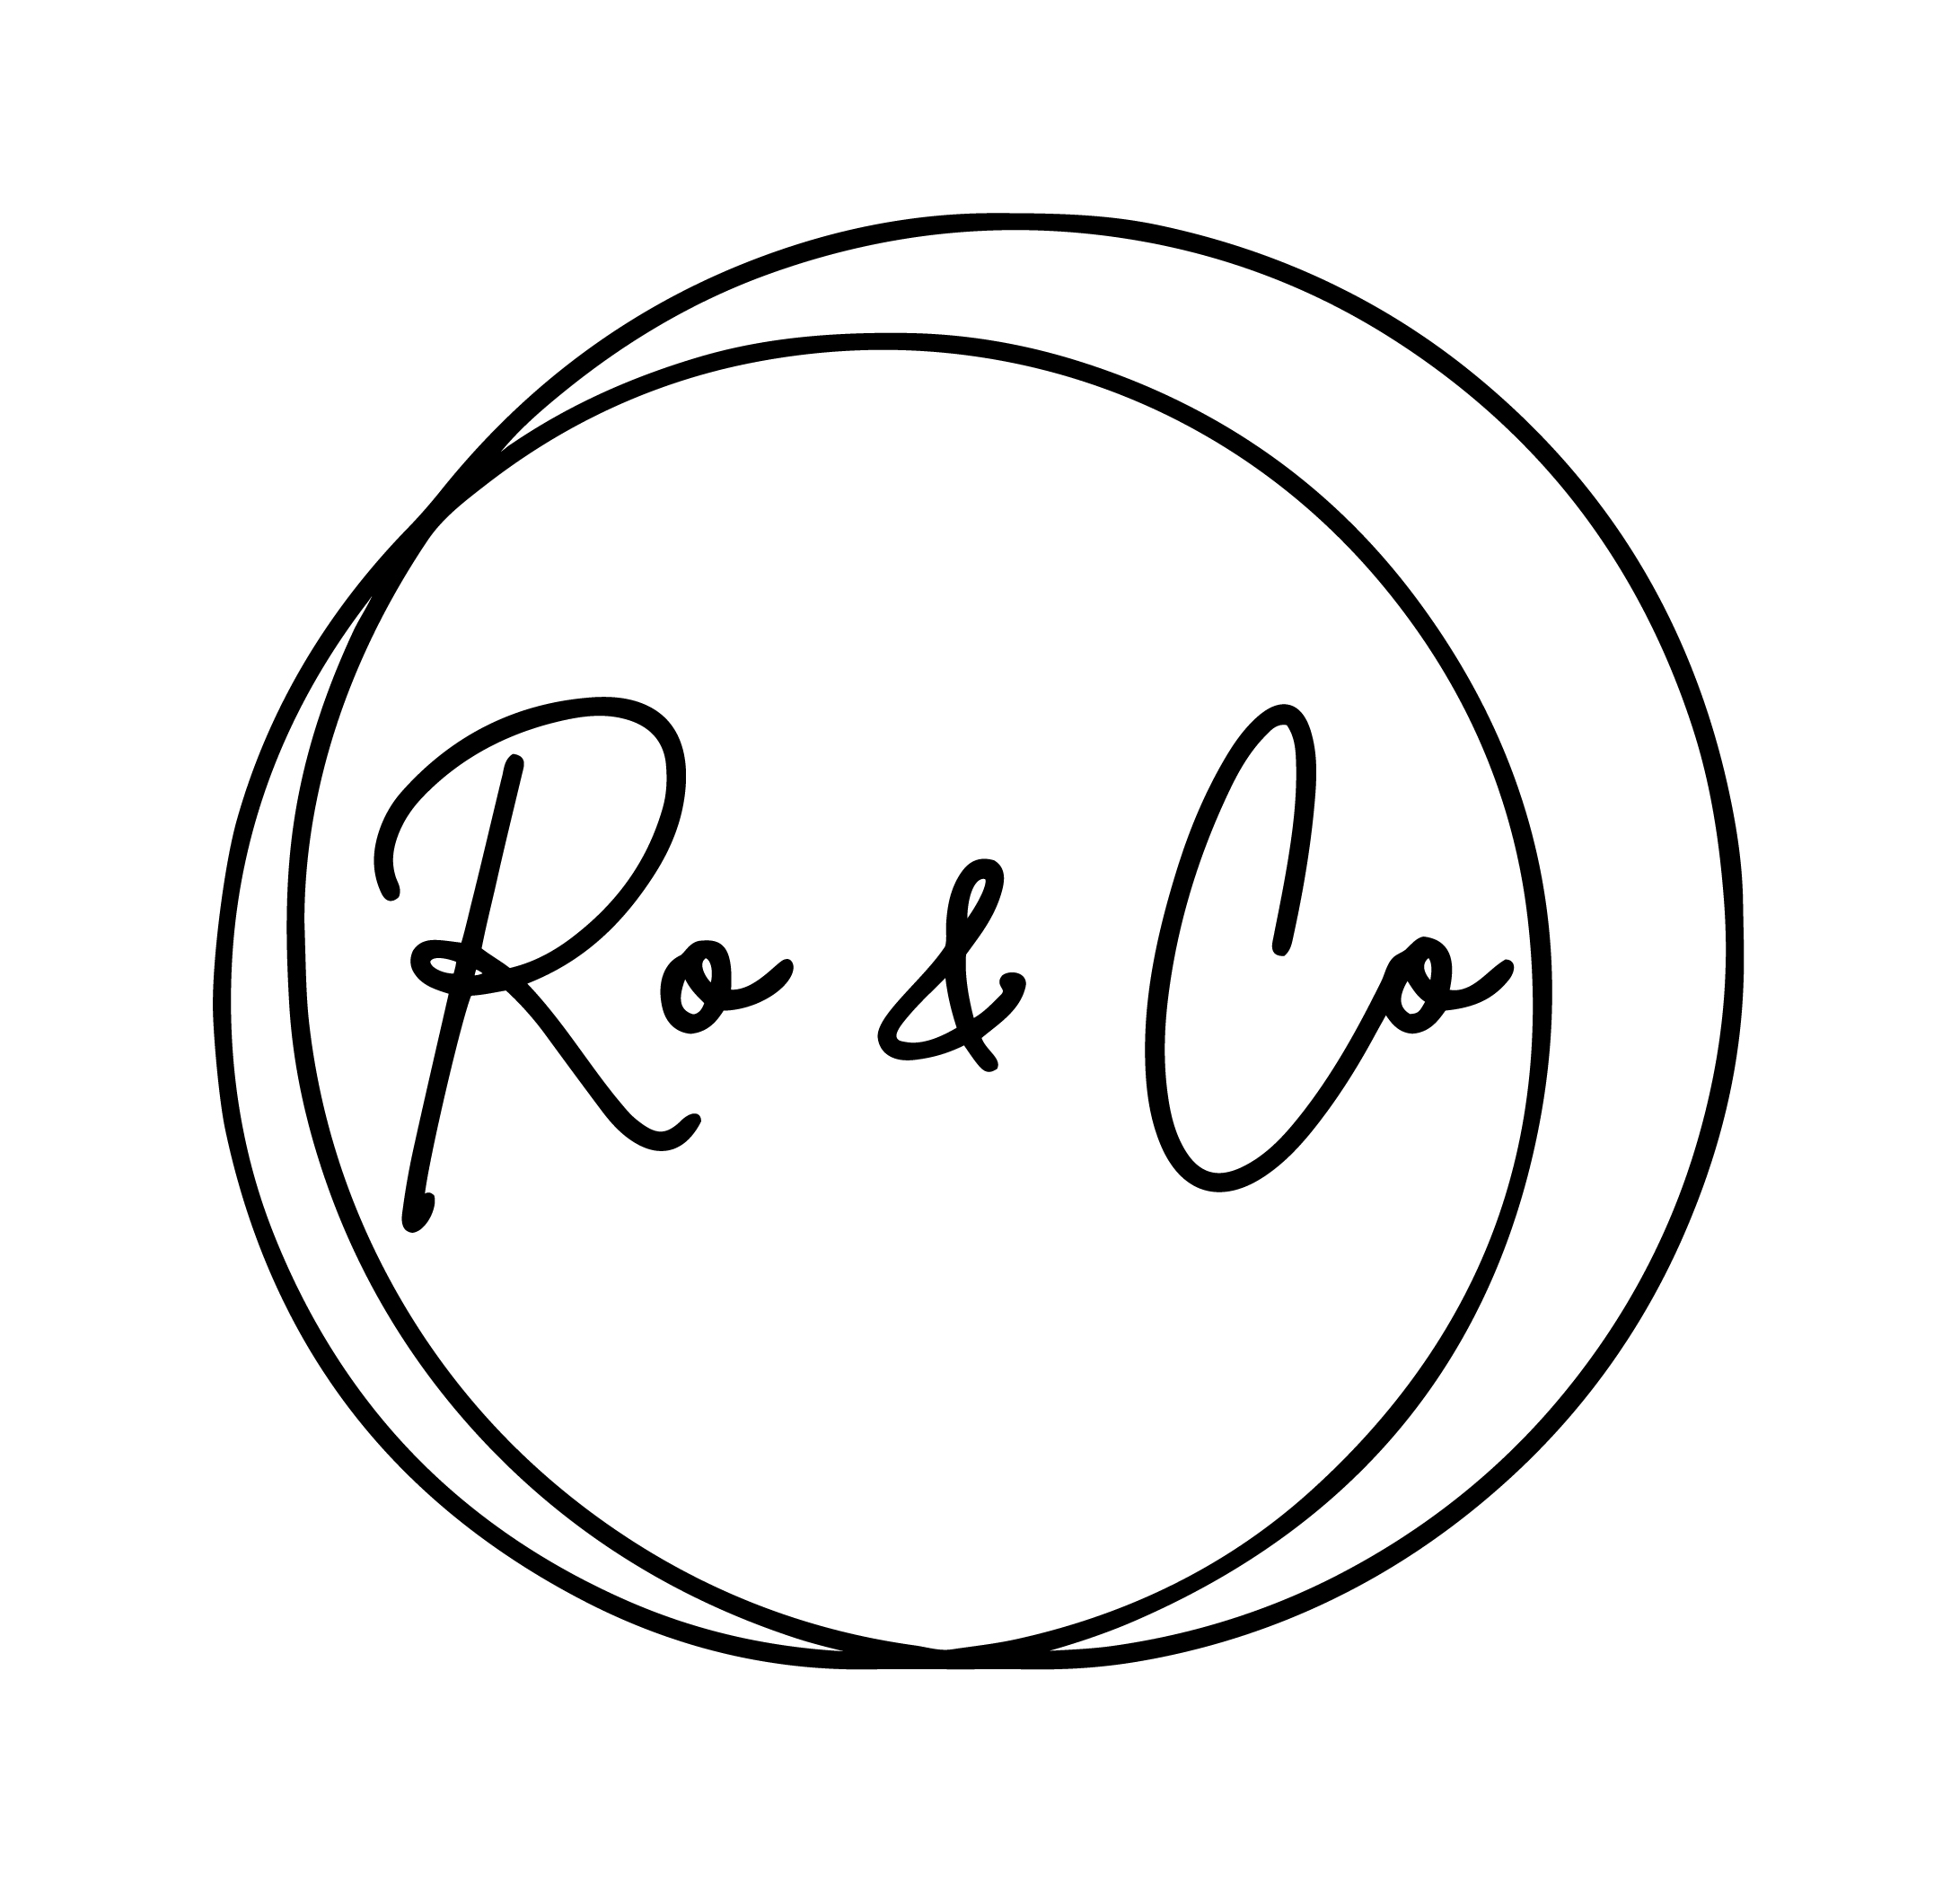 Ro and Co Clothing